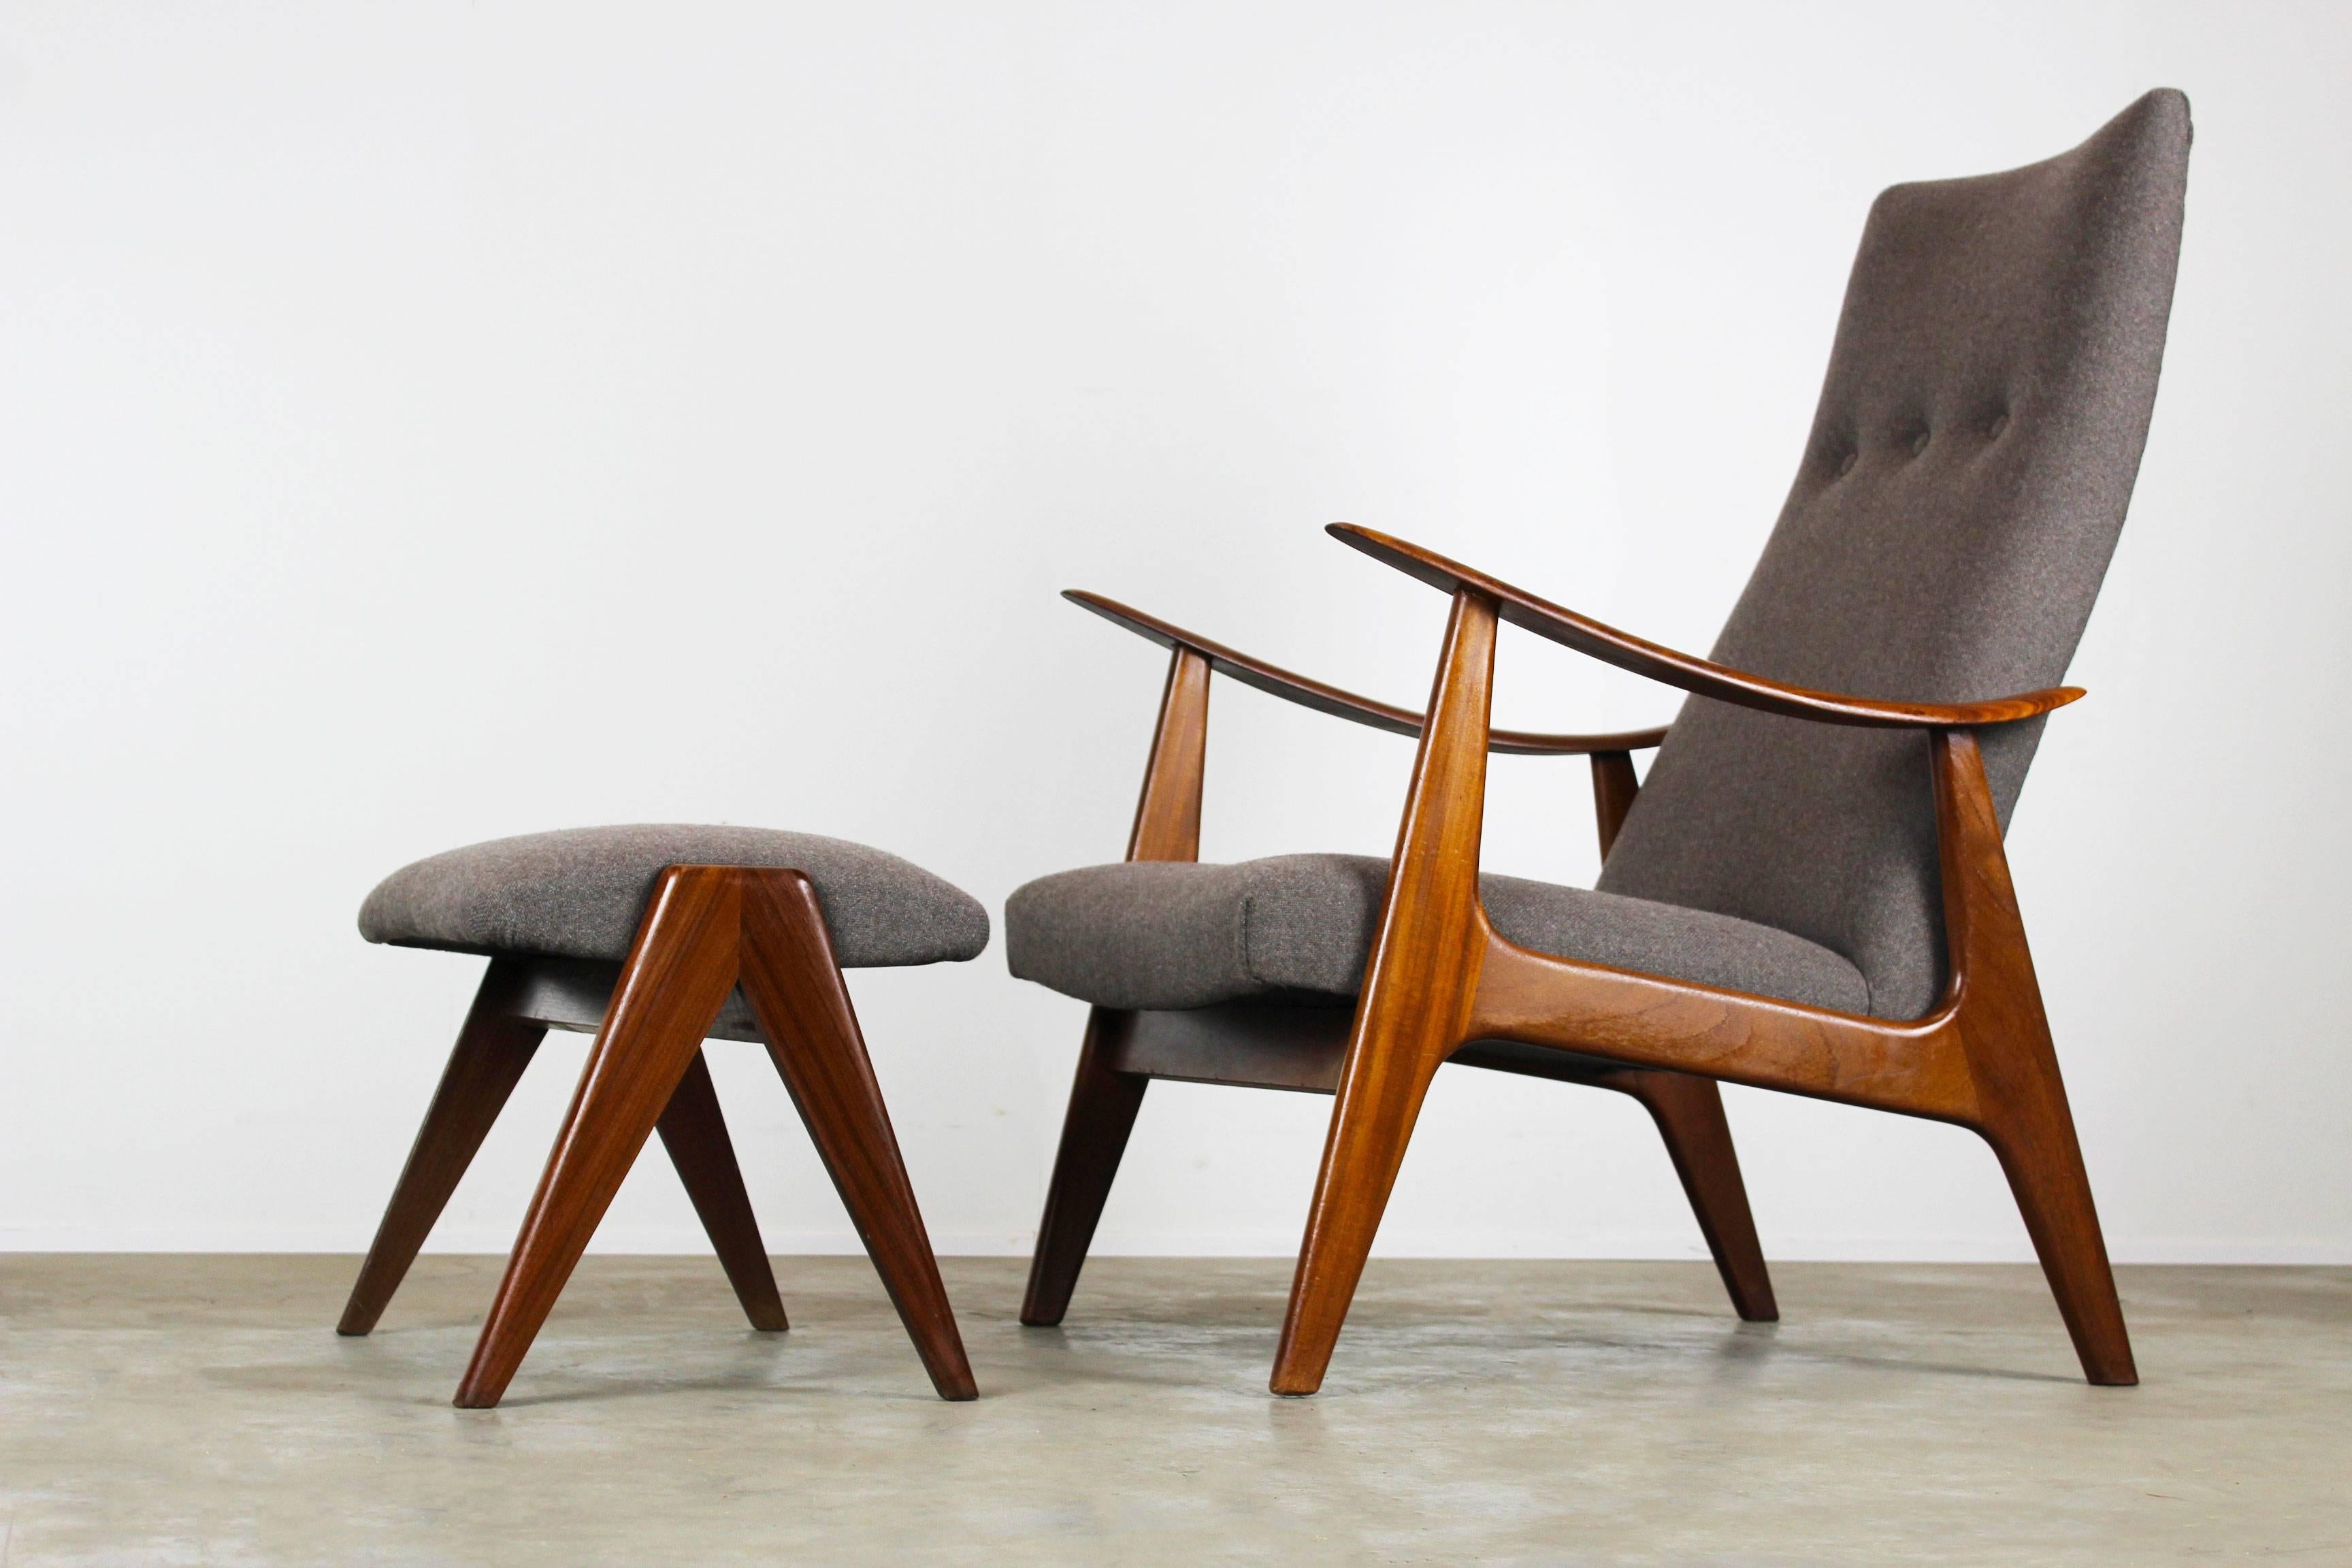 Wonderful Lounge chair and ottoman designed by Dutch designer Louis van Teeffelen for Webe in 1960. Organic sculpted solid teak frame that always catches your eye, new upholstery in grey (color matches the original upholstery). A set that will make